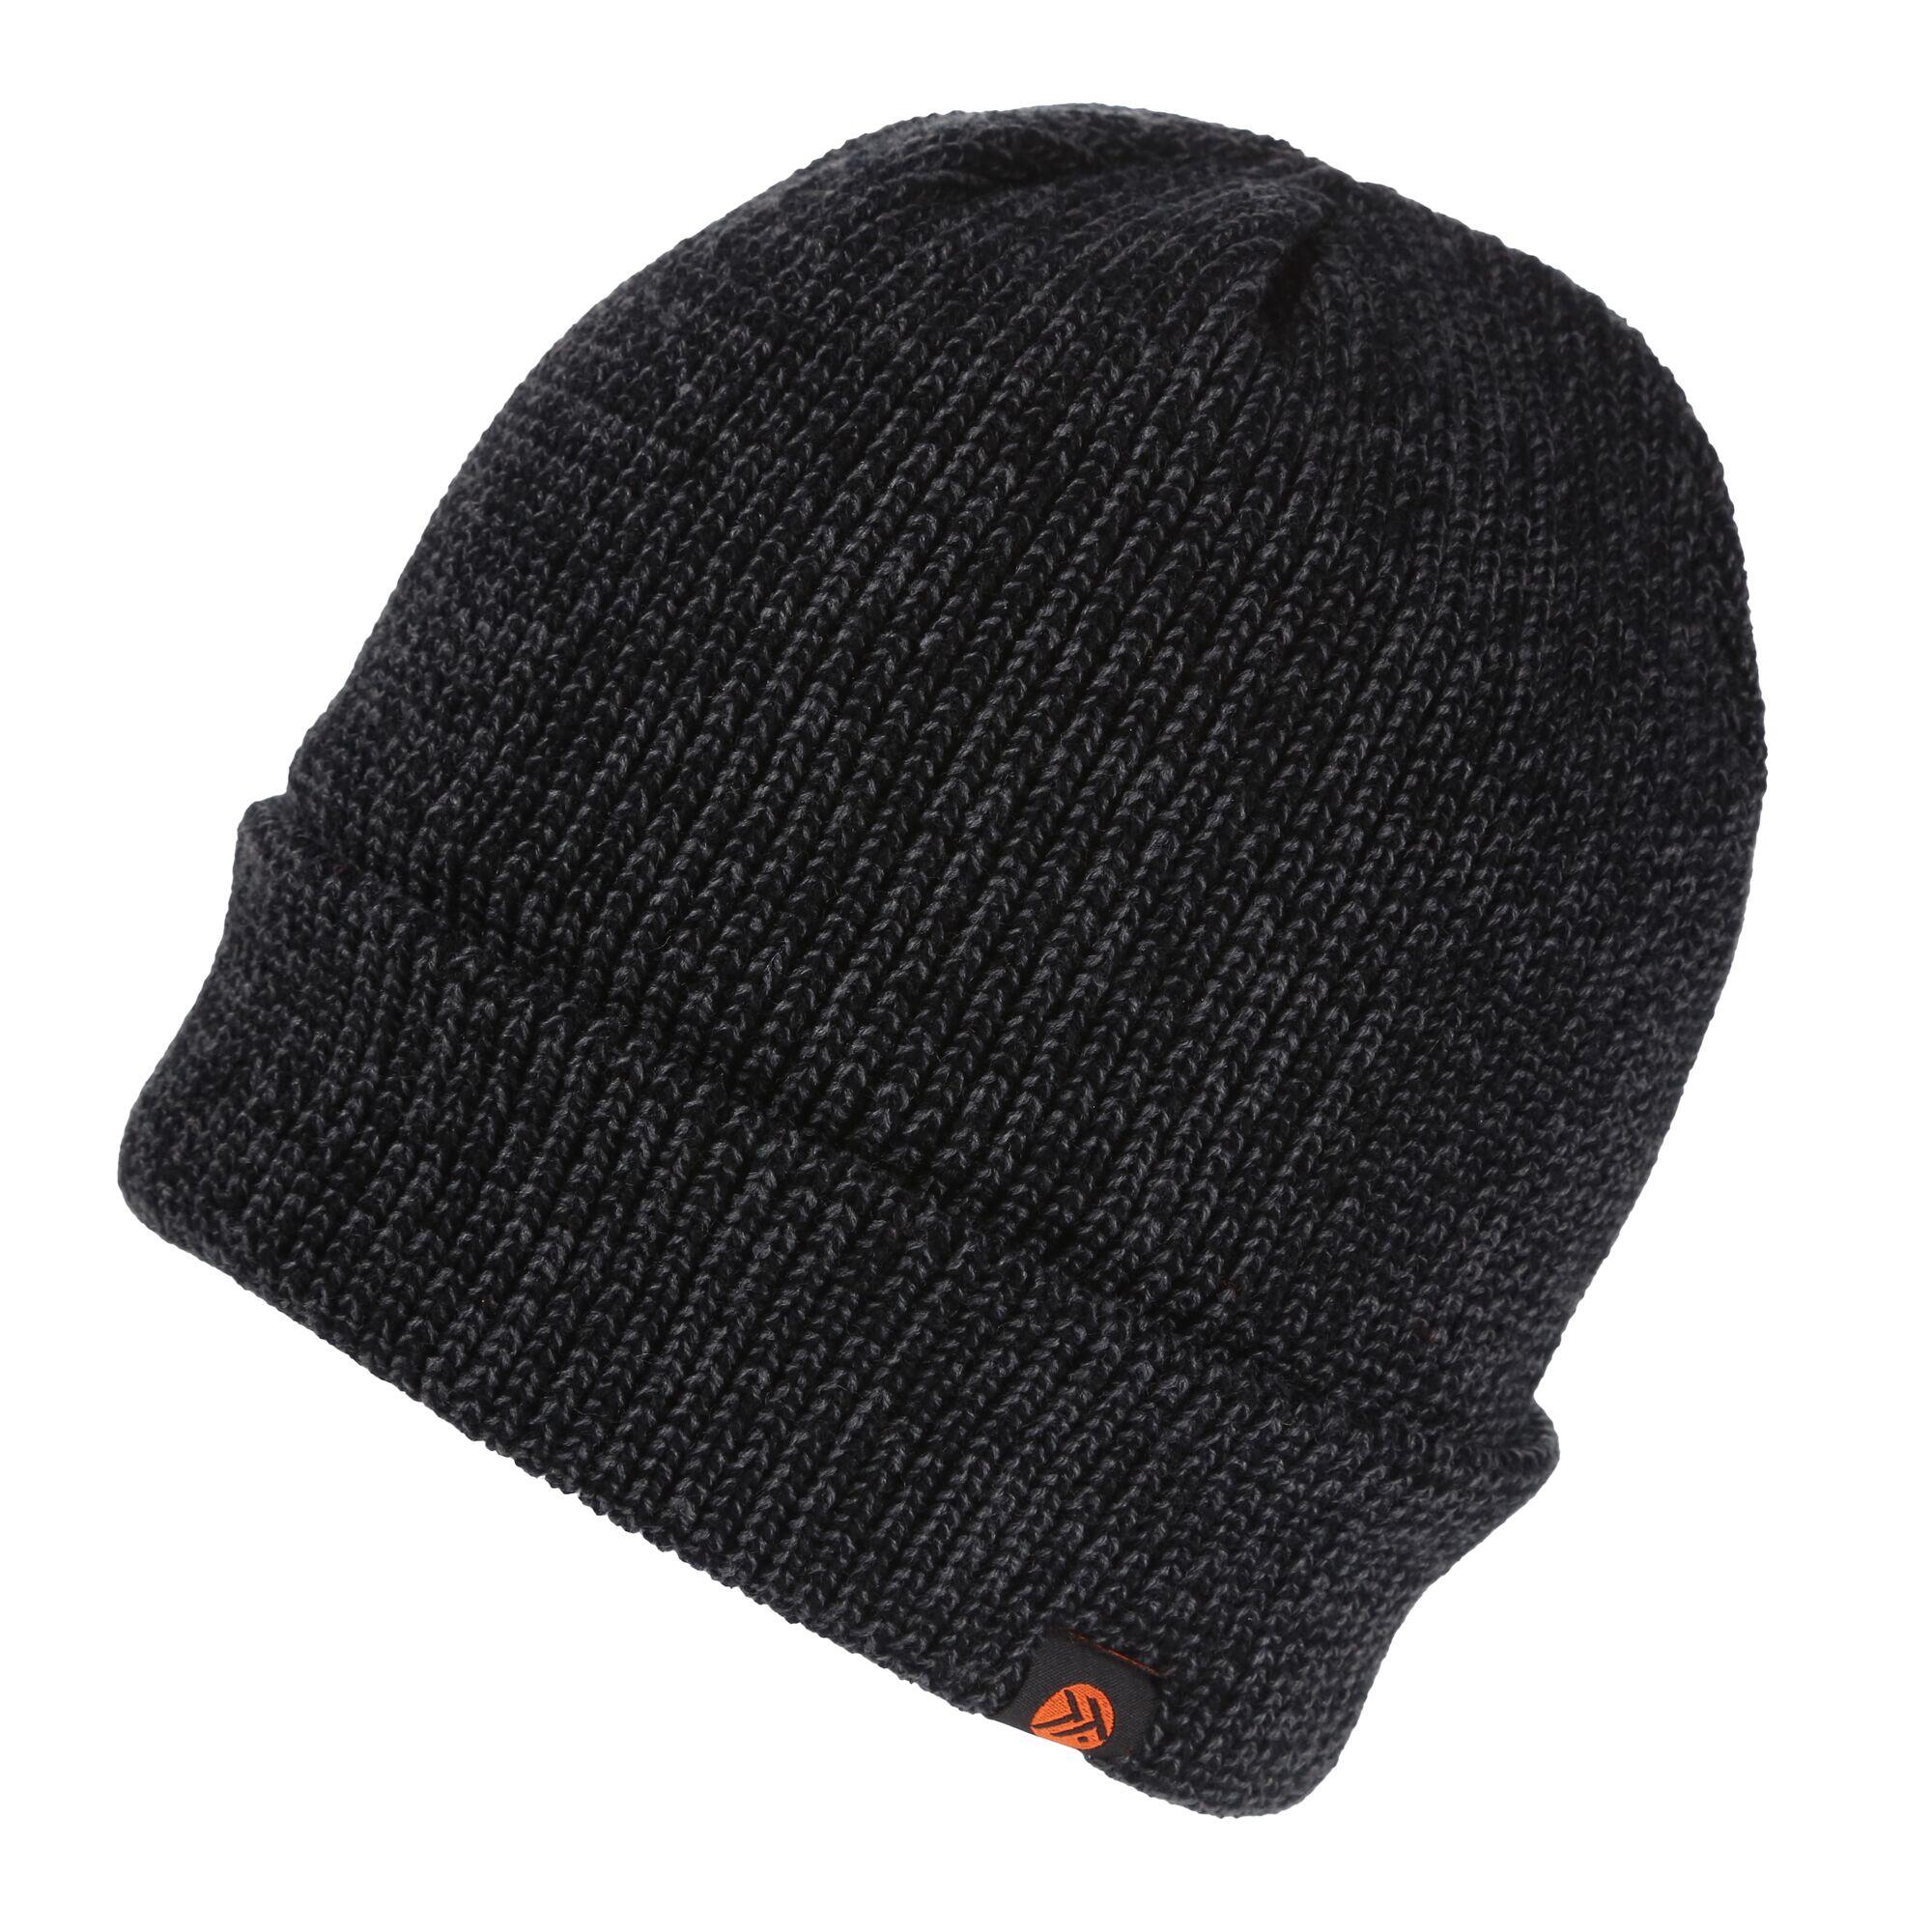 Mens Tactical Knitted Beanie (Black) 1/4